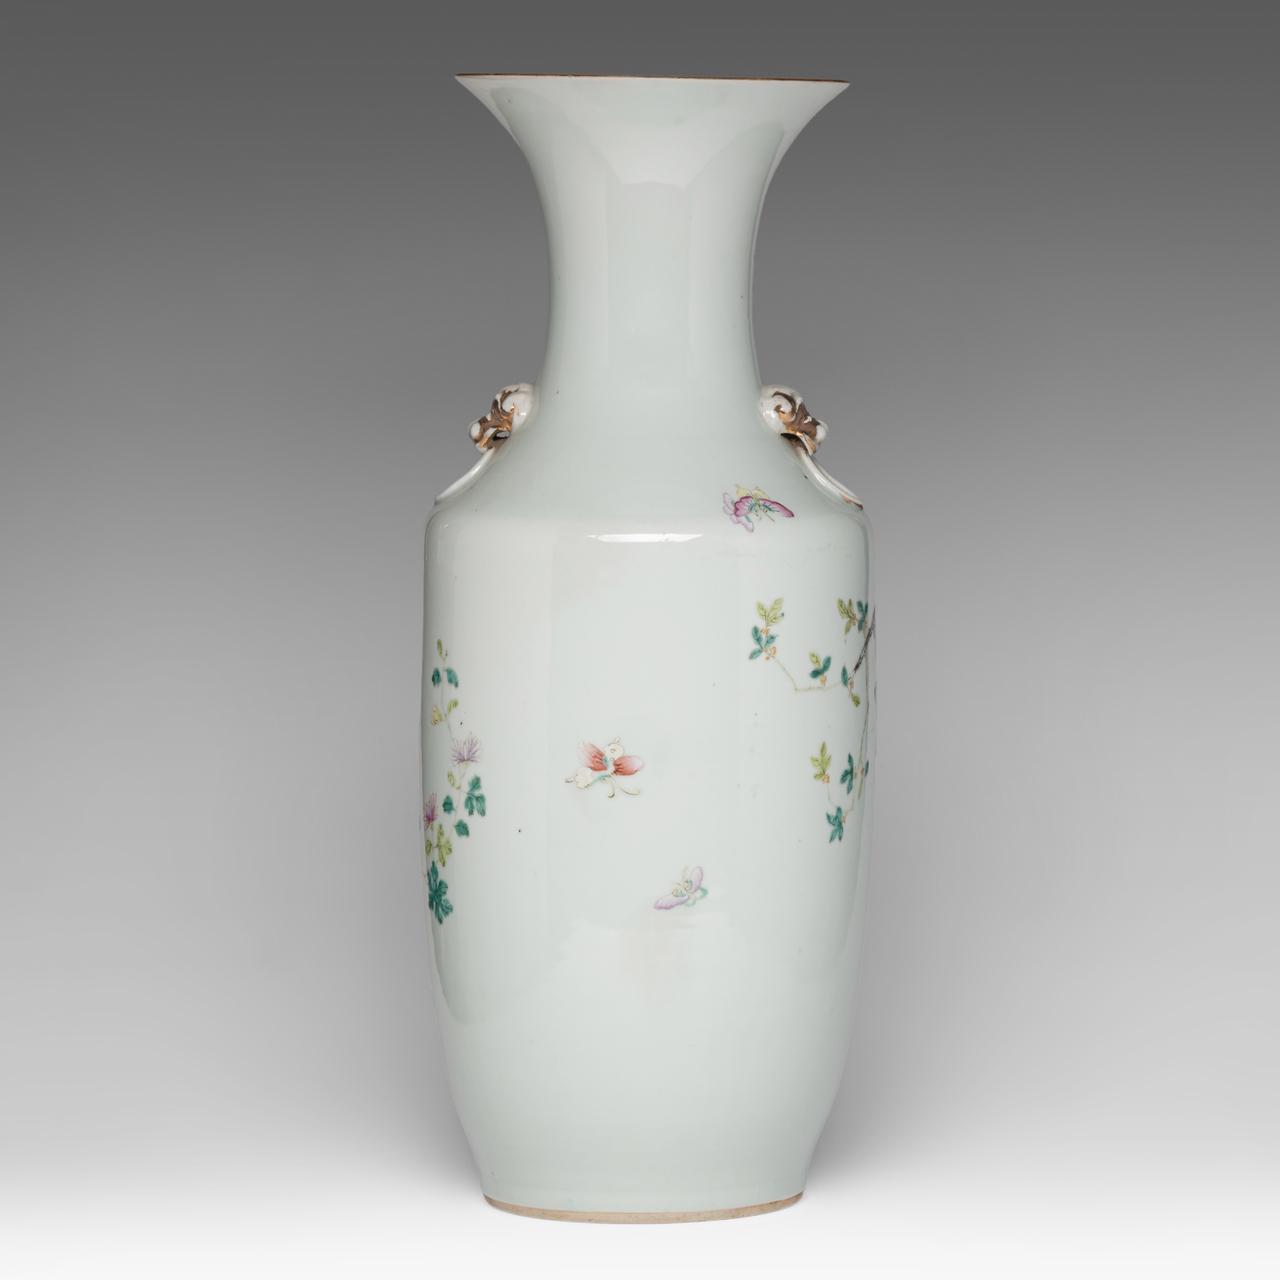 A Chinese famille rose 'Flower garden' vase, paired with lion head handles, late 19thC, H 57,8 cm - Image 3 of 6